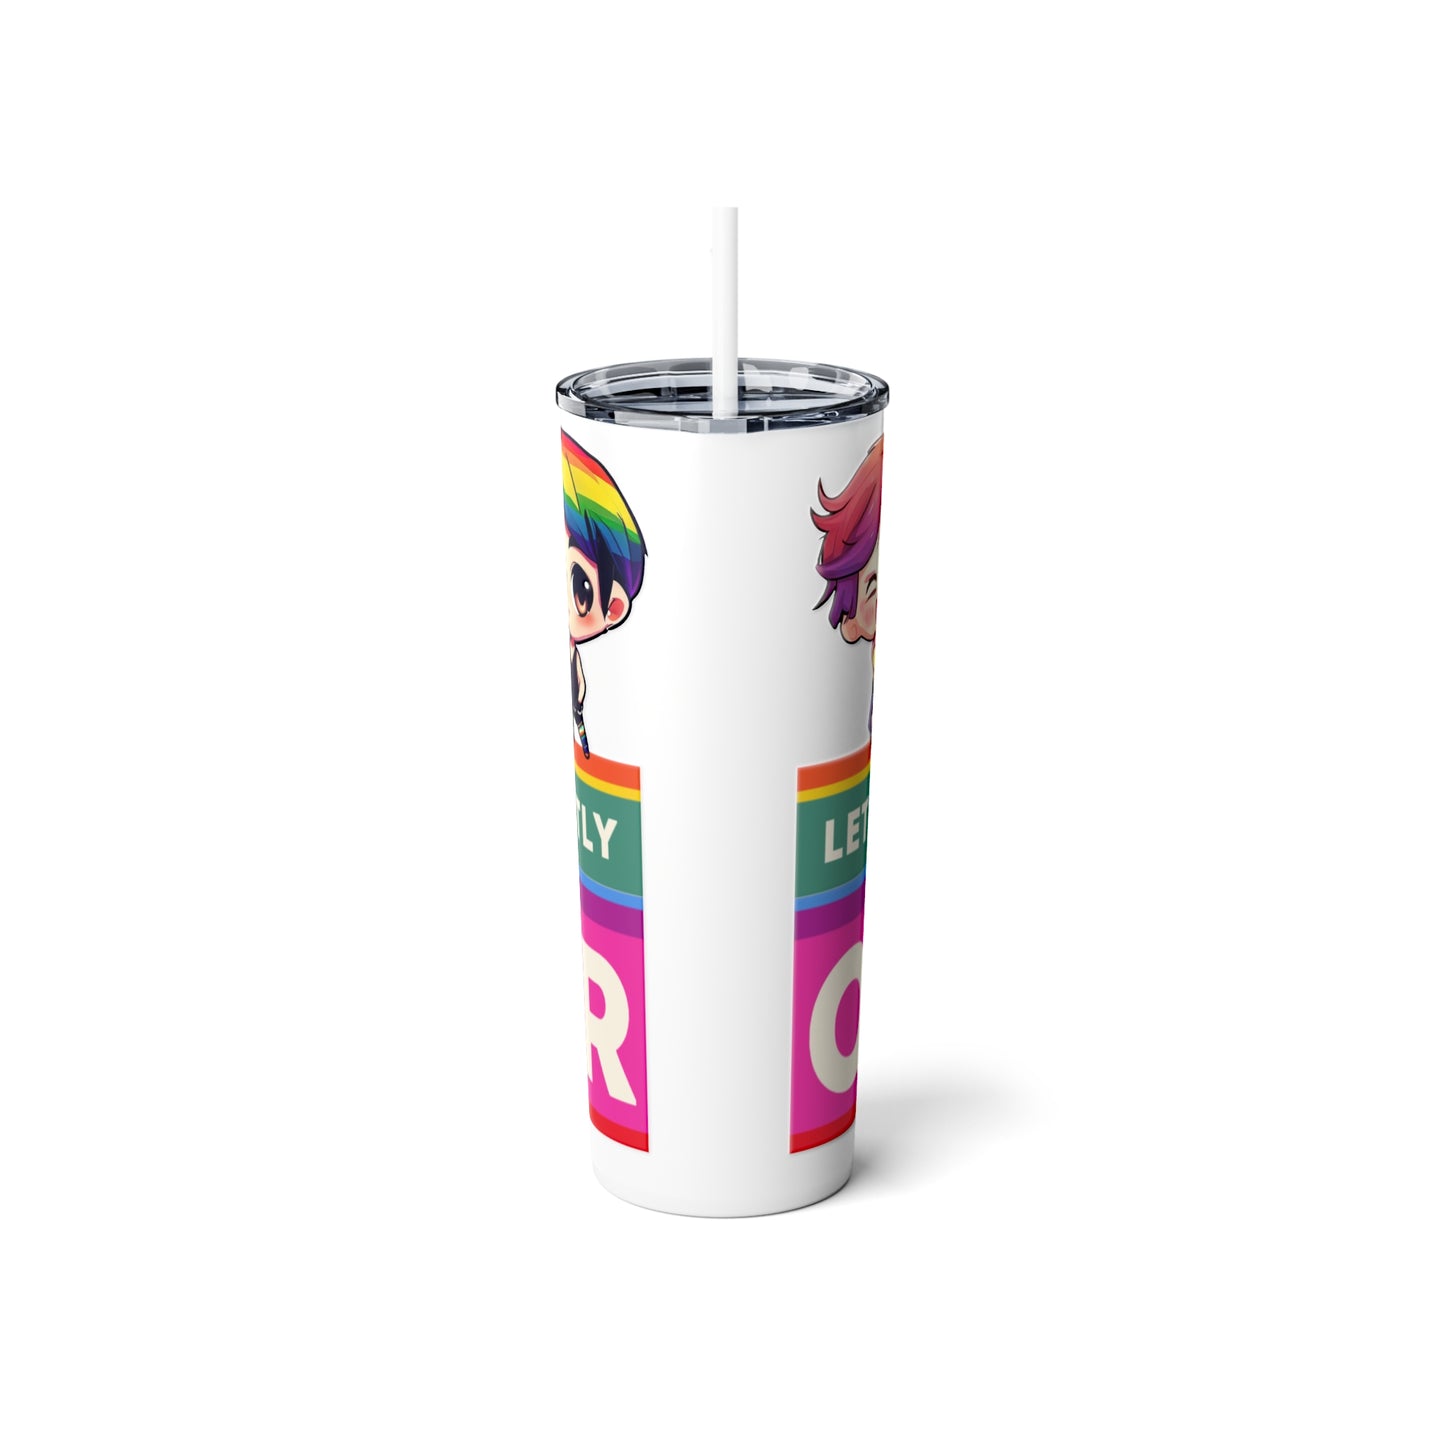 Skinny Steel Tumbler with Straw, 20oz, Let Me Be Perfectly Queer, Chibi